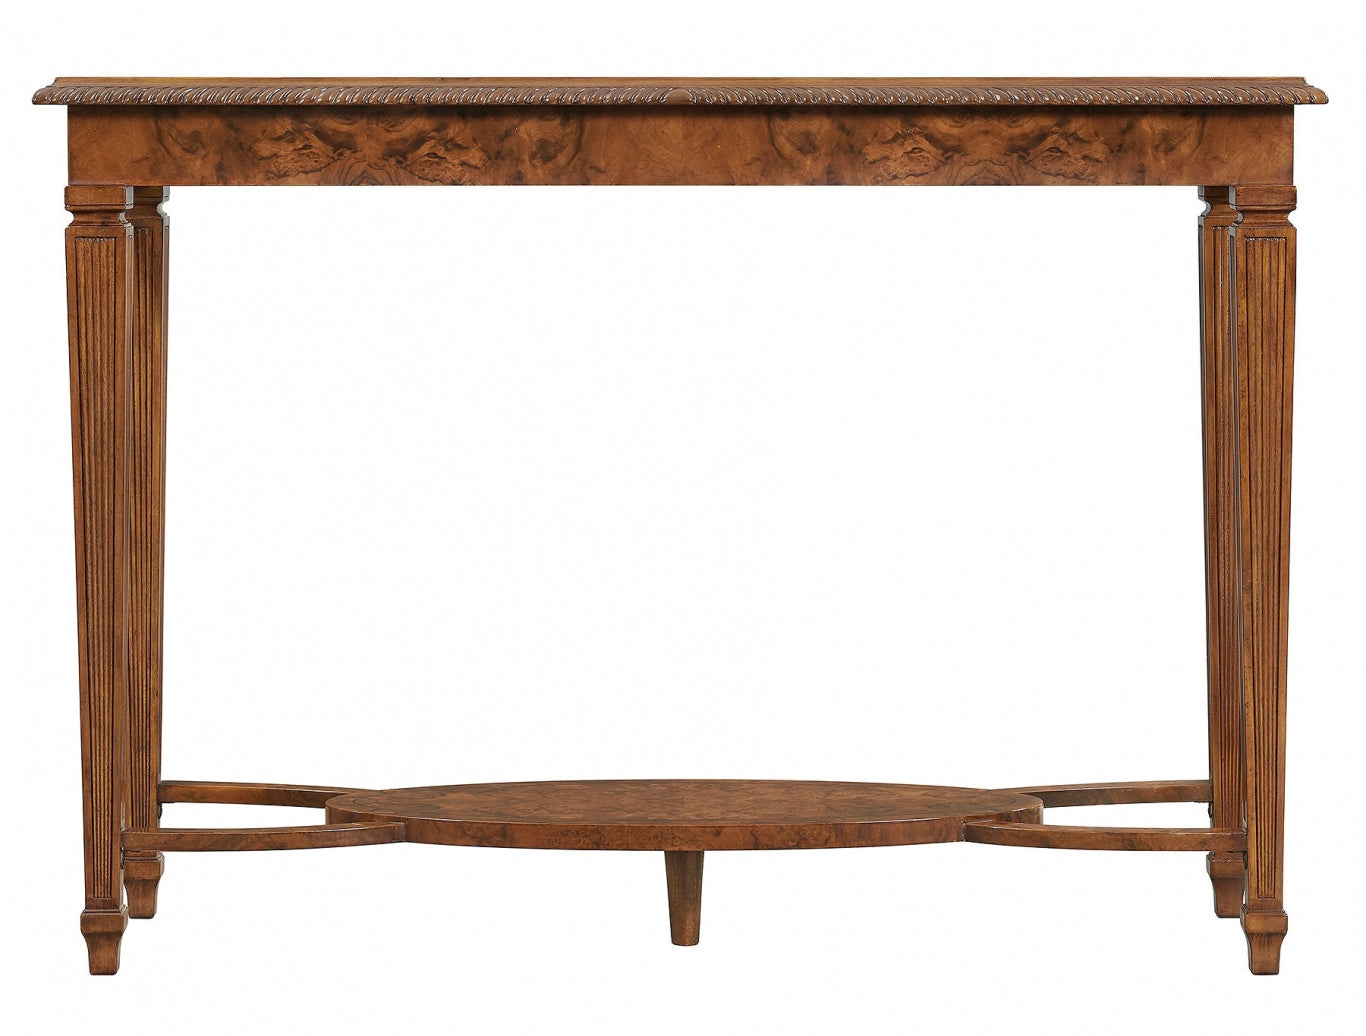 Burr walnut console table with glass top